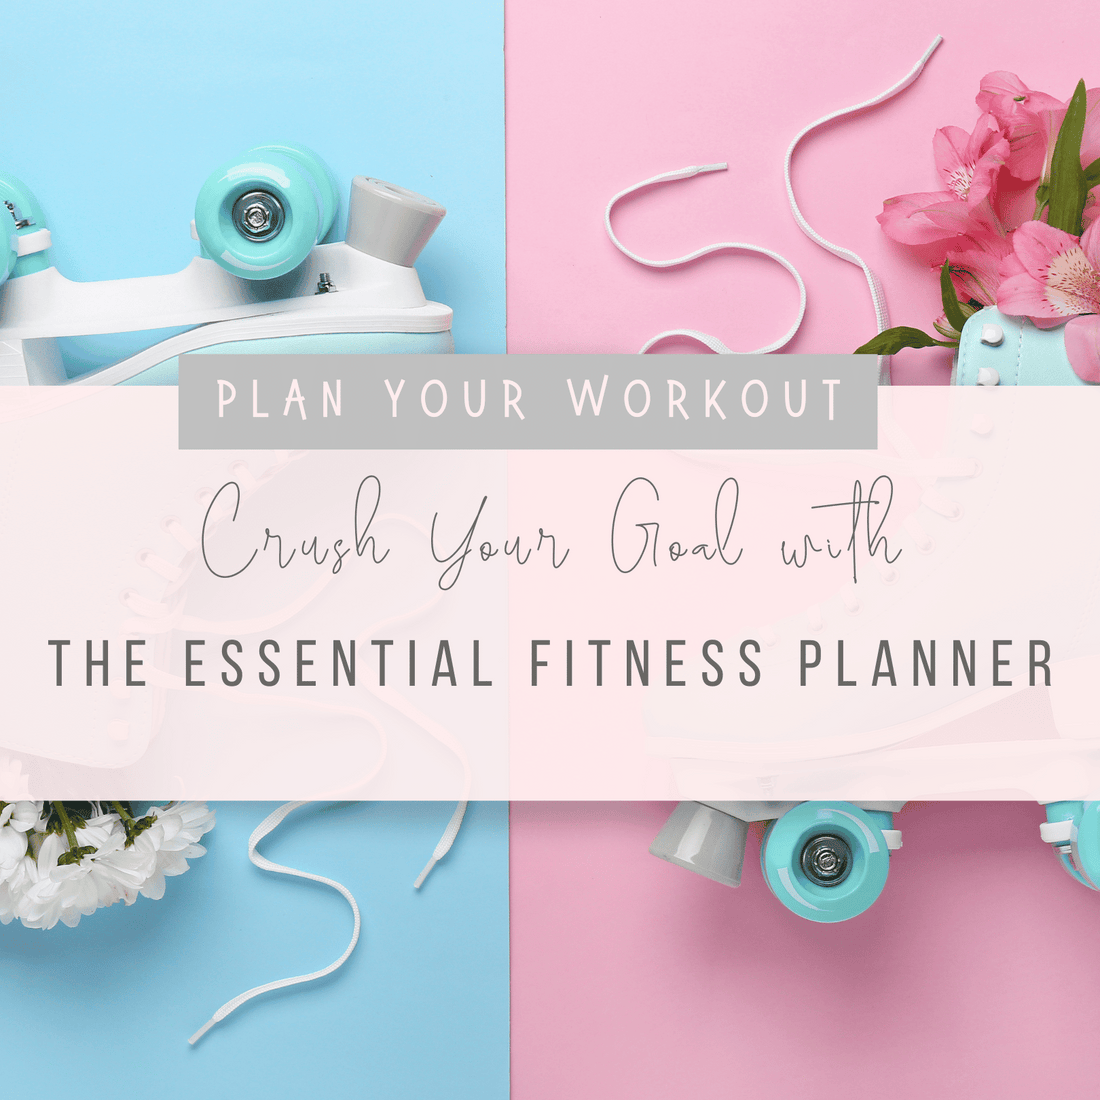 Plan Your Workouts, Crush Your Goals with The Essential Fitness Planner Printable!